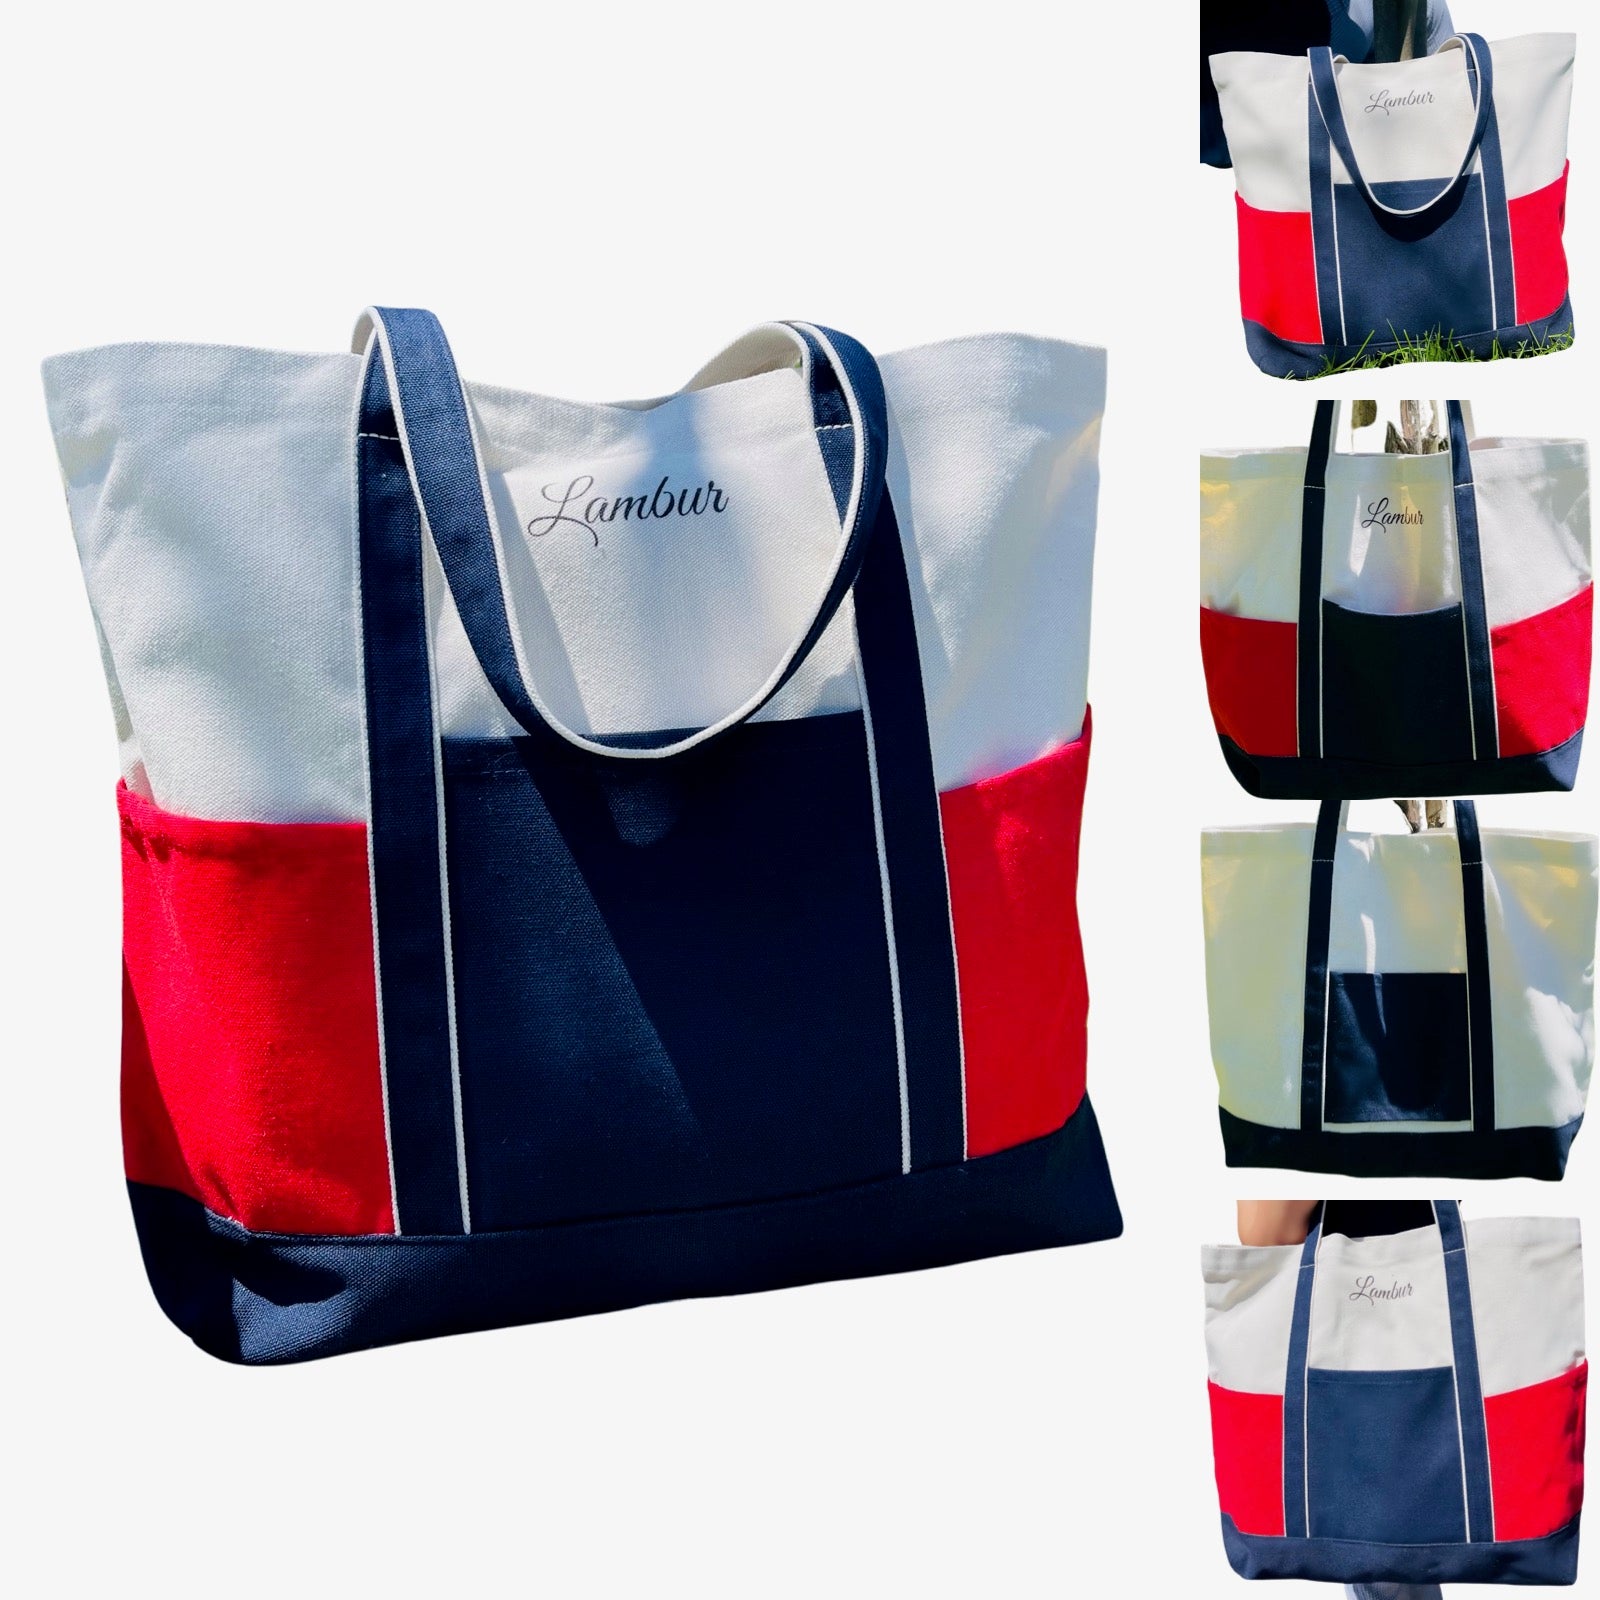 "Go green with the Lambur Extra Large Eco-Friendly Reusable Multi-Purpose Grocery Shopping Bag. Perfect for eco-conscious shoppers, this spacious and durable bag is designed for all your shopping needs. Say goodbye to single-use plastics and hello to sustainable shopping with this versatile and stylish tote!"